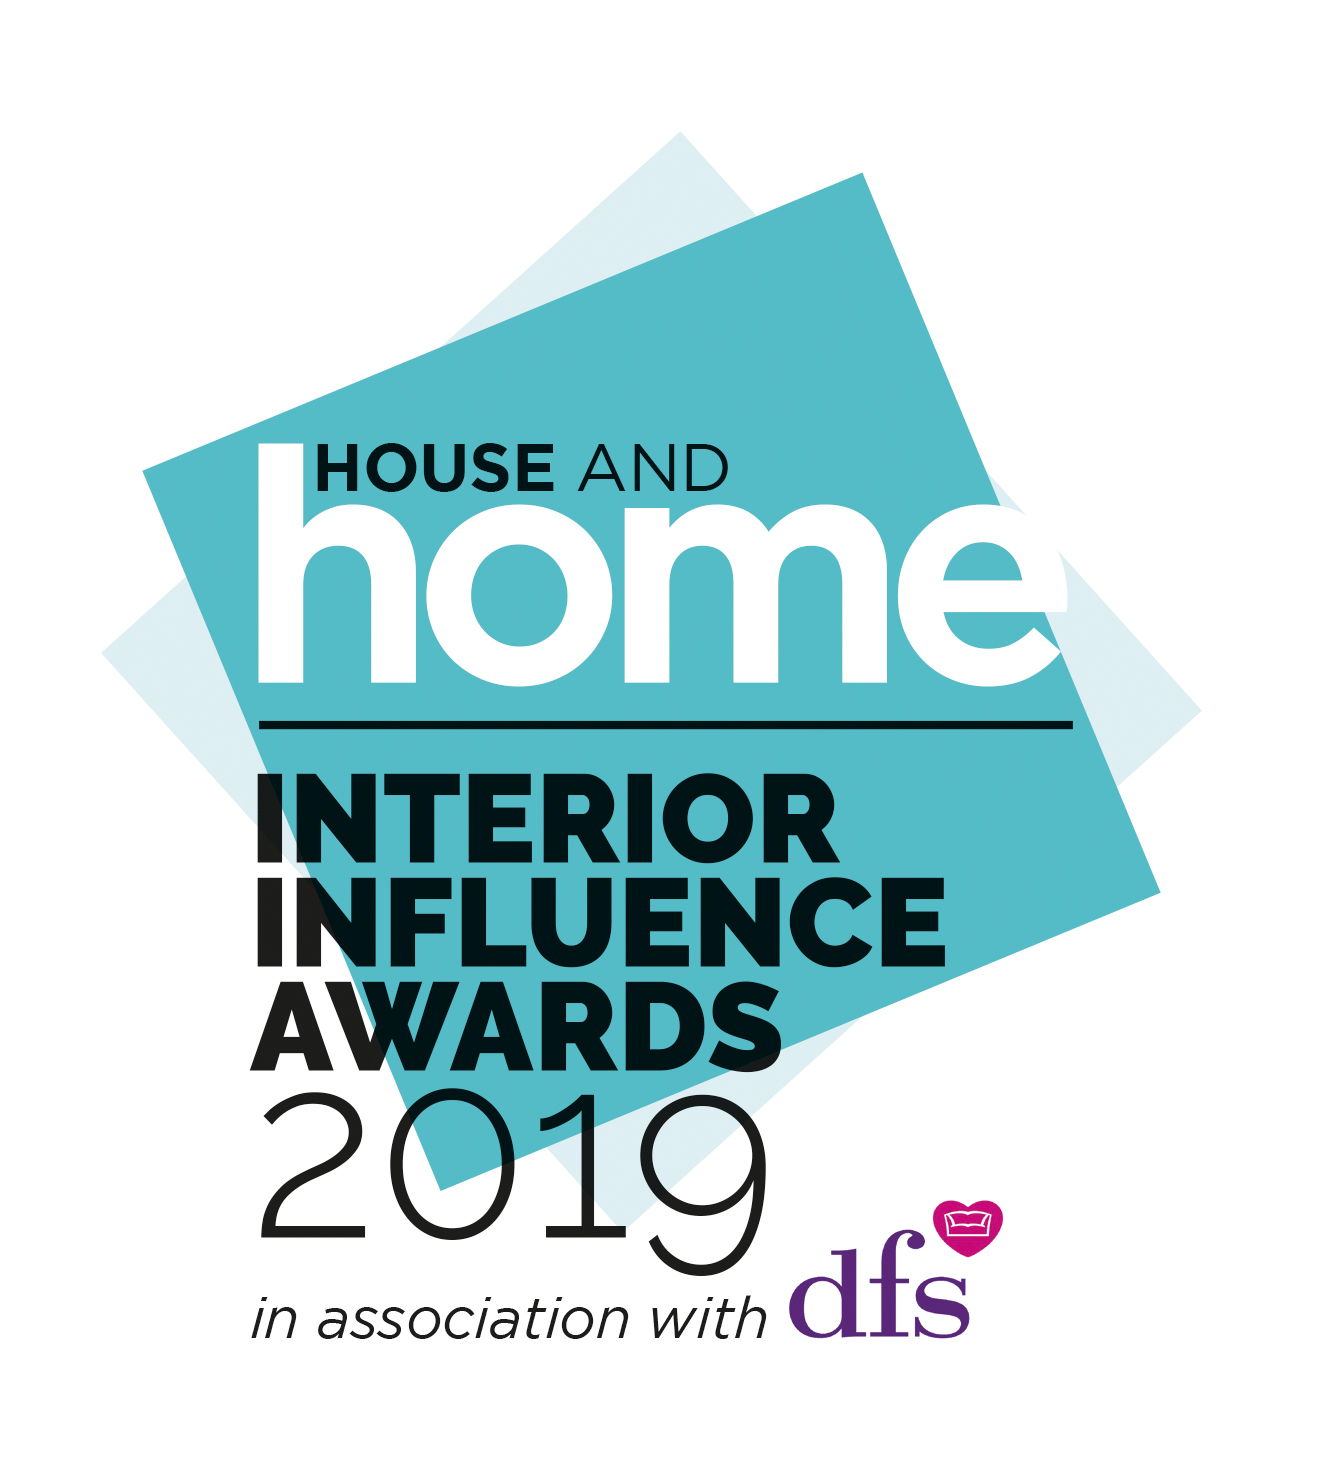 House and Home Interior Influence Awards in association with DFS [logo]